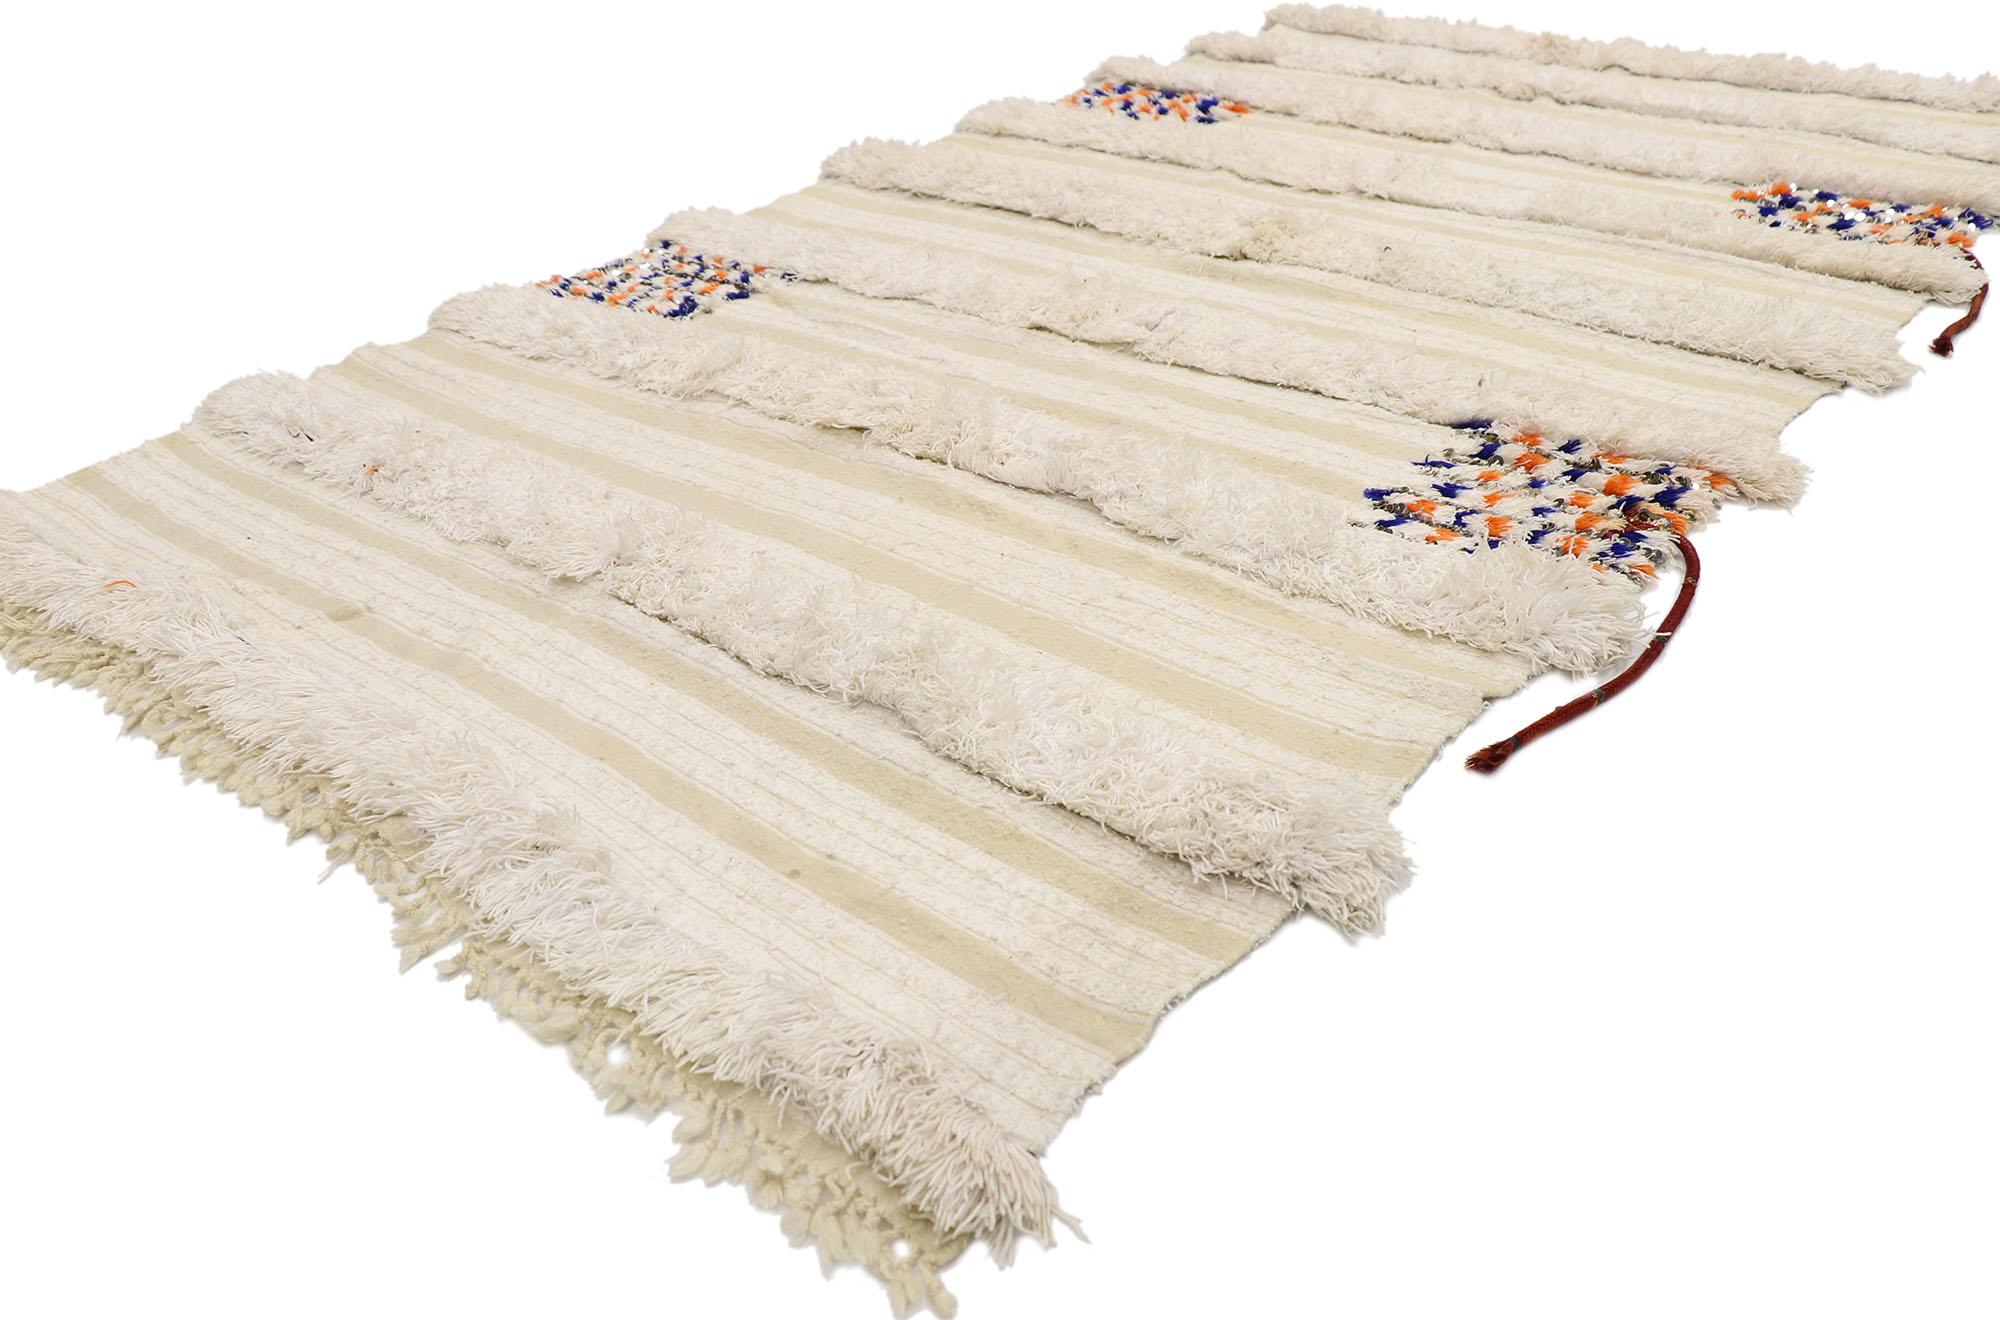 21547 Vintage Moroccan Wedding Blanket with Original Cape Ties, 04'00 x 07'06. This handwoven wool vintage Moroccan Wedding Blanket also known as a Berber Tamizart Handira features rows of fluffy fringe and four square embellished with paillette